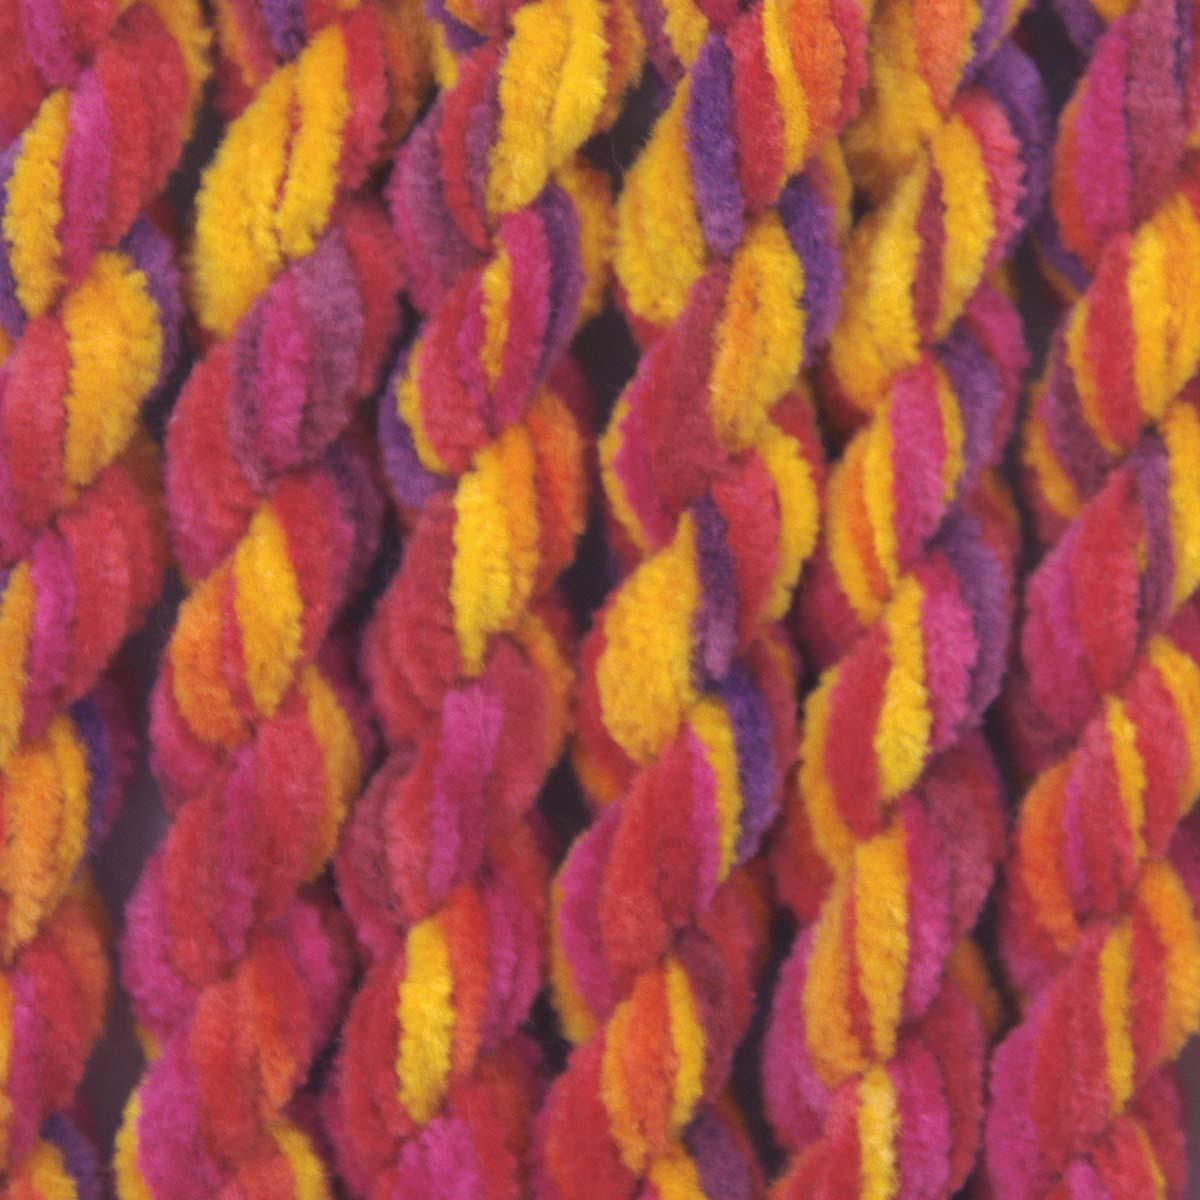 www.colourstreams.com.au Colour Streams Hand Dyed Chenille Threads Slow Stitch Embroidery Textile Arts Fibre DL 10 Venetian Sunset Yellows Reds Purples Oranges Gold